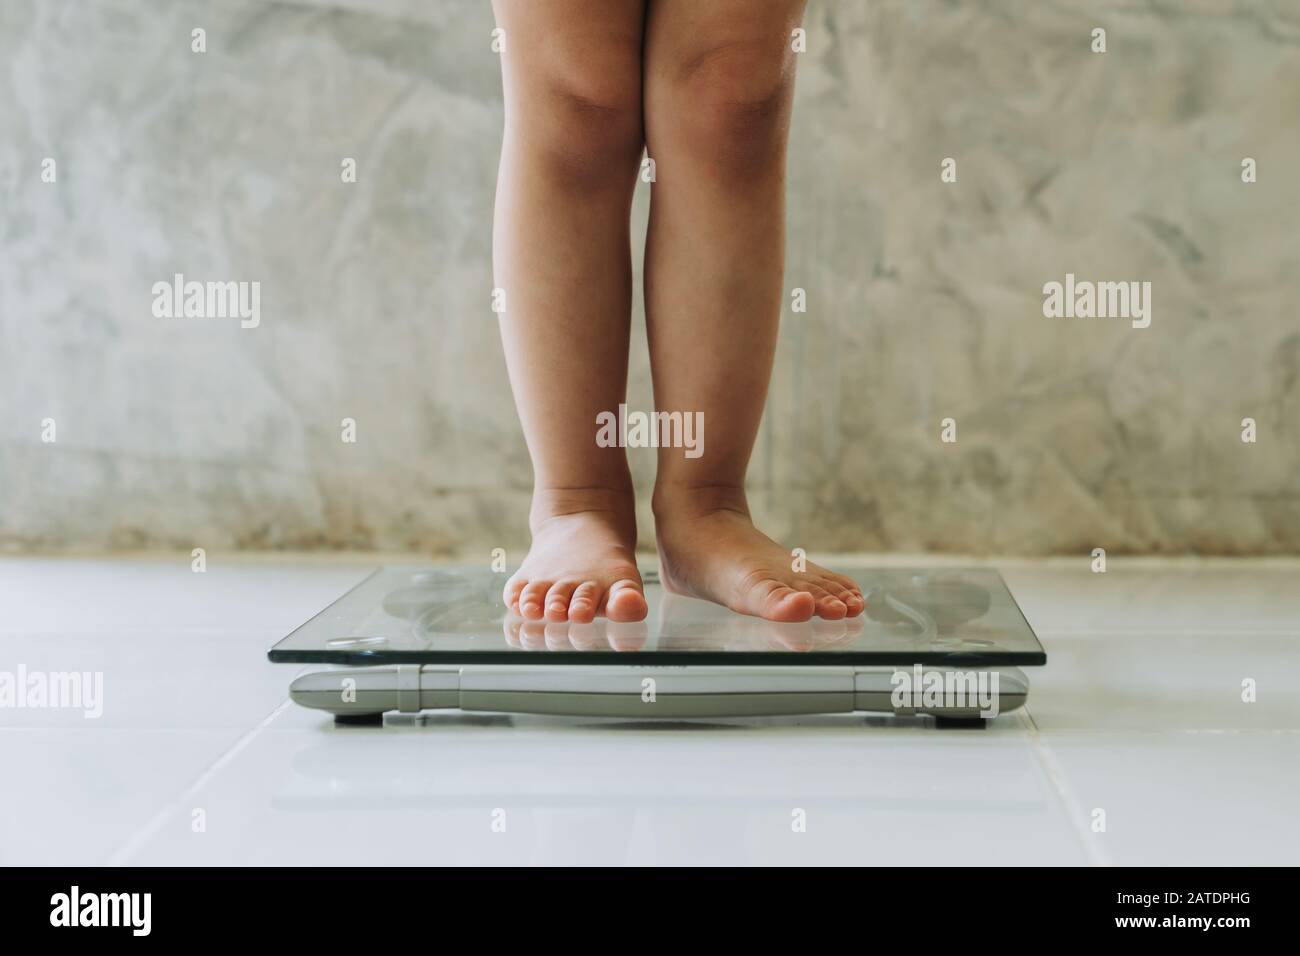 Female feet on scales - Stock Image - F003/6919 - Science Photo Library